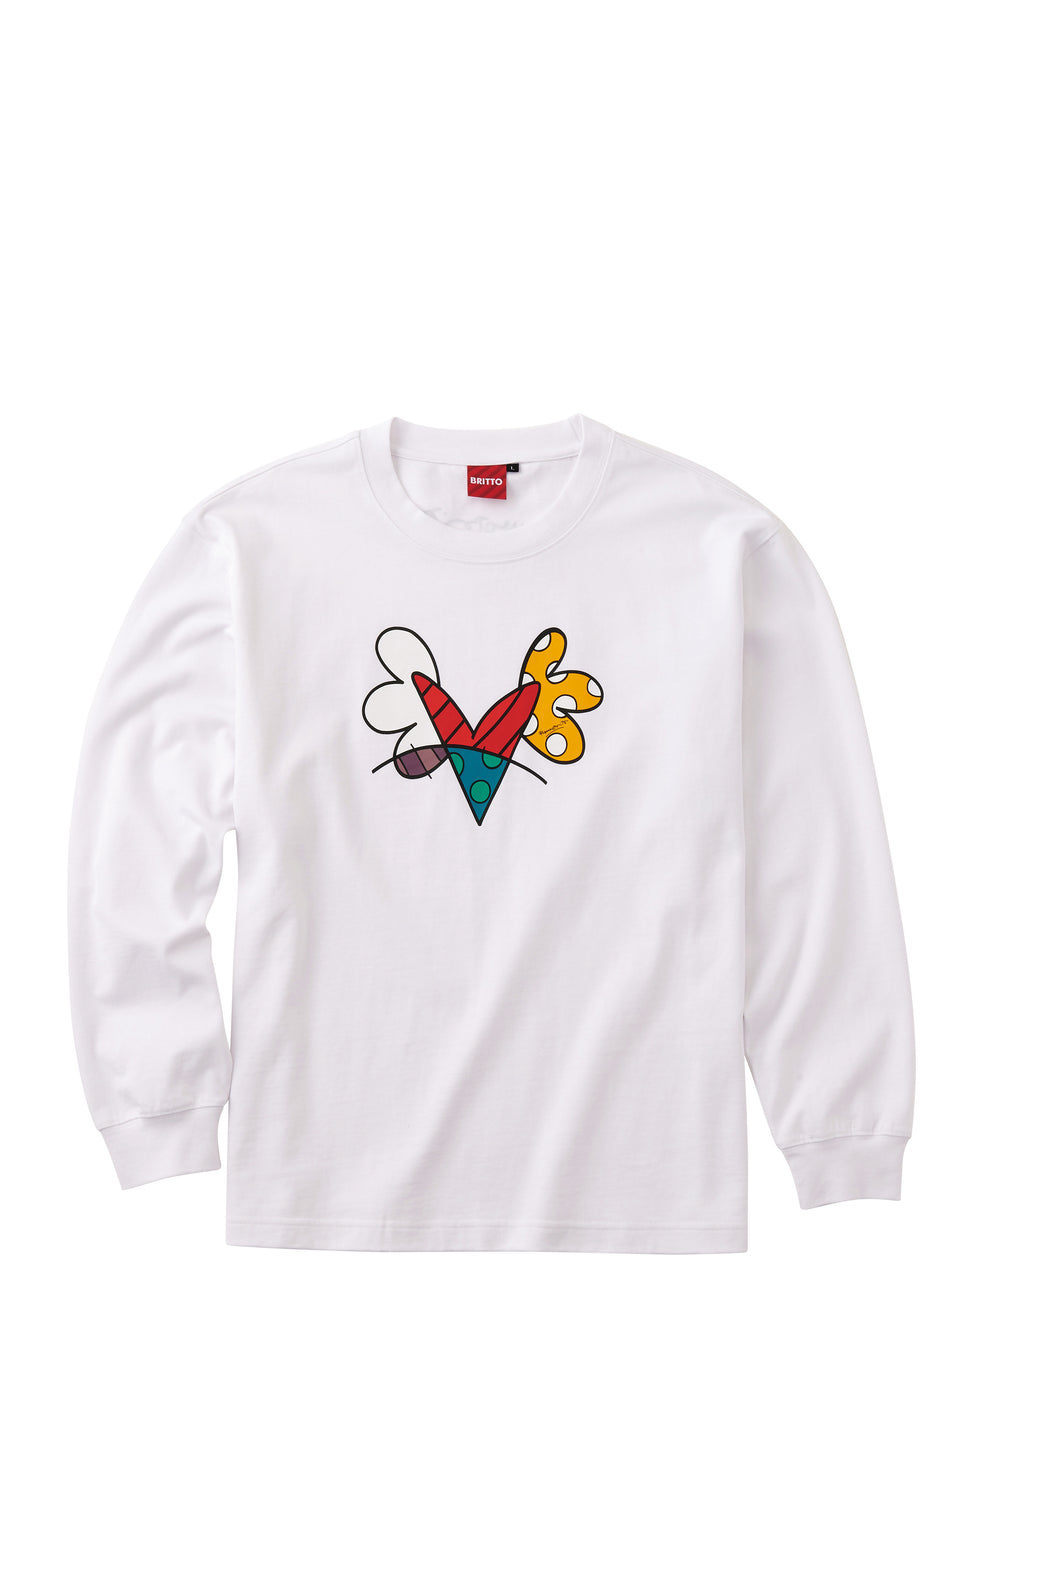 ROMERO LOVE IS IN THE AIR Tシャツ (Long Sleeve)